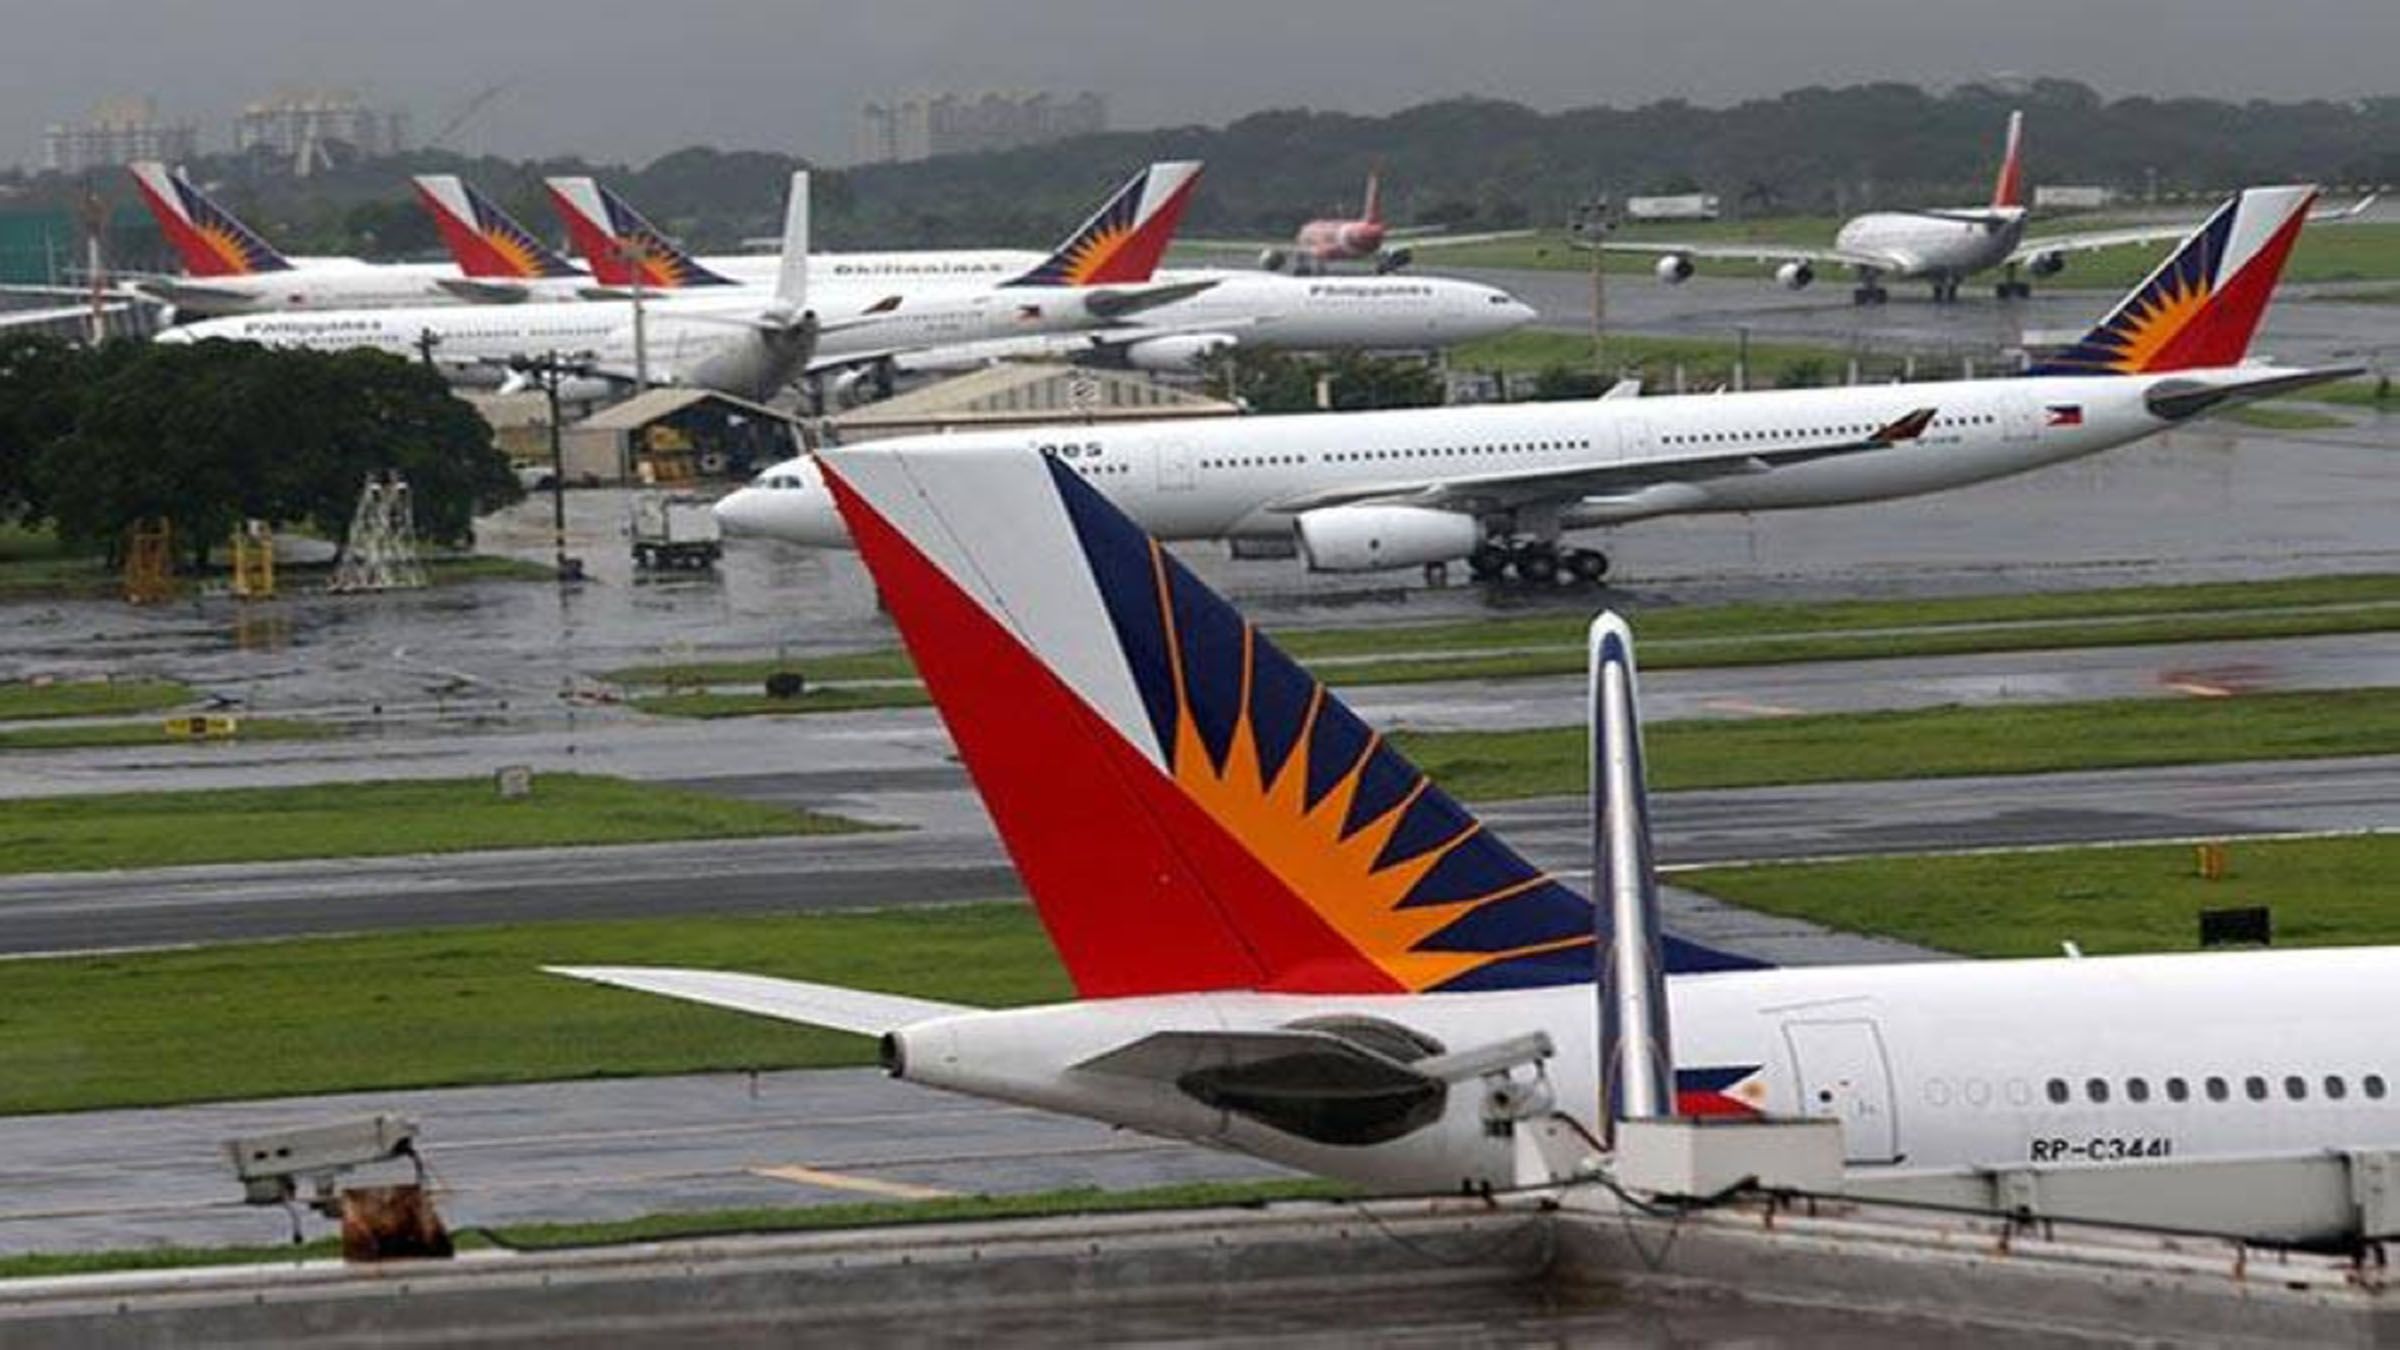 PAL resumes full operations as weather improves